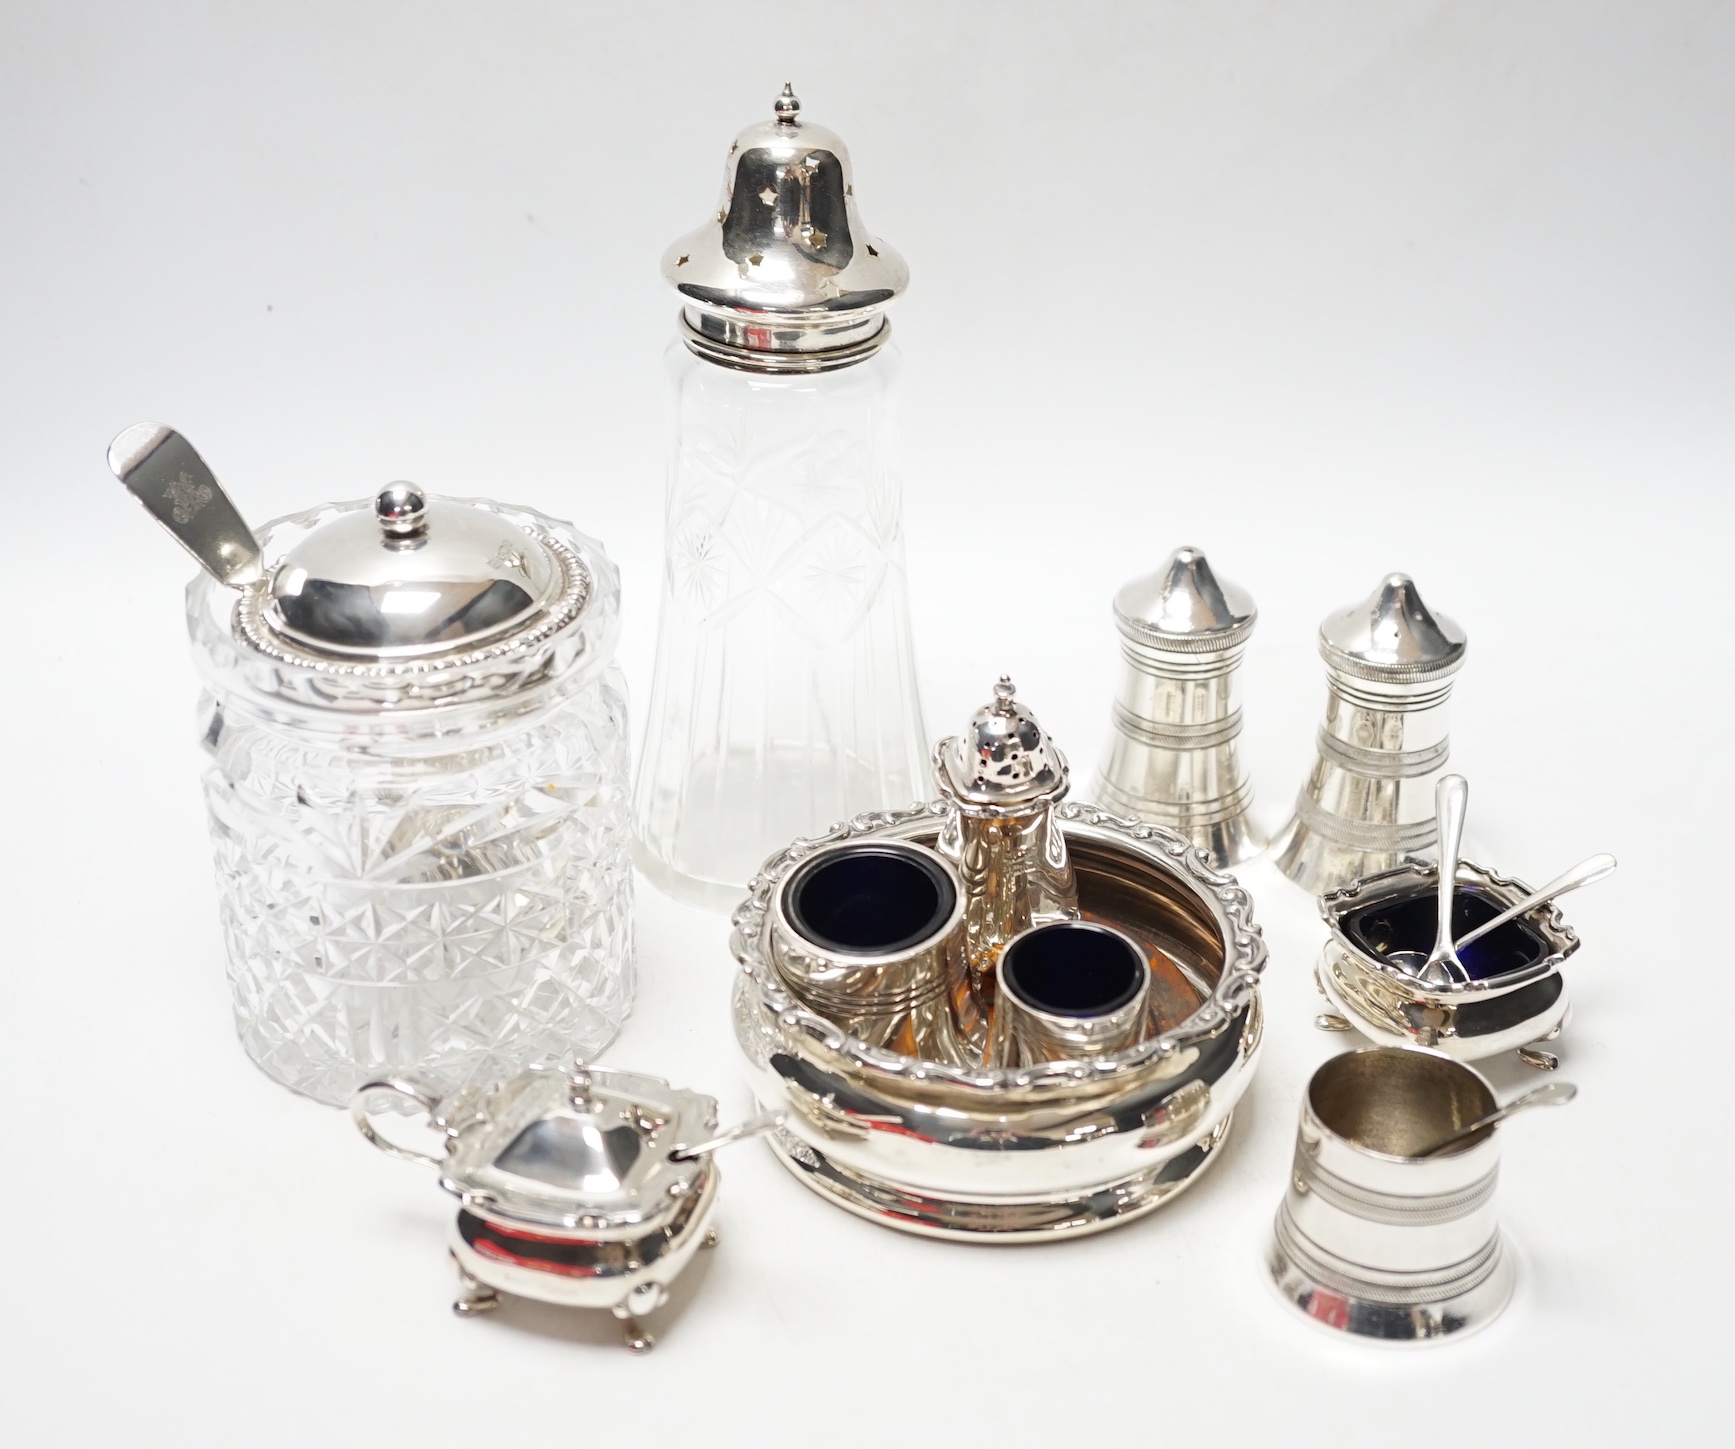 An Edwardian silver wine coaster, William Hutton & Sons, Birmingham, 1903, diameter 10.4cm, a later silver three piece condiment set, a silver mounted glass preserve jar, with a George silver teaspoon and six plated item